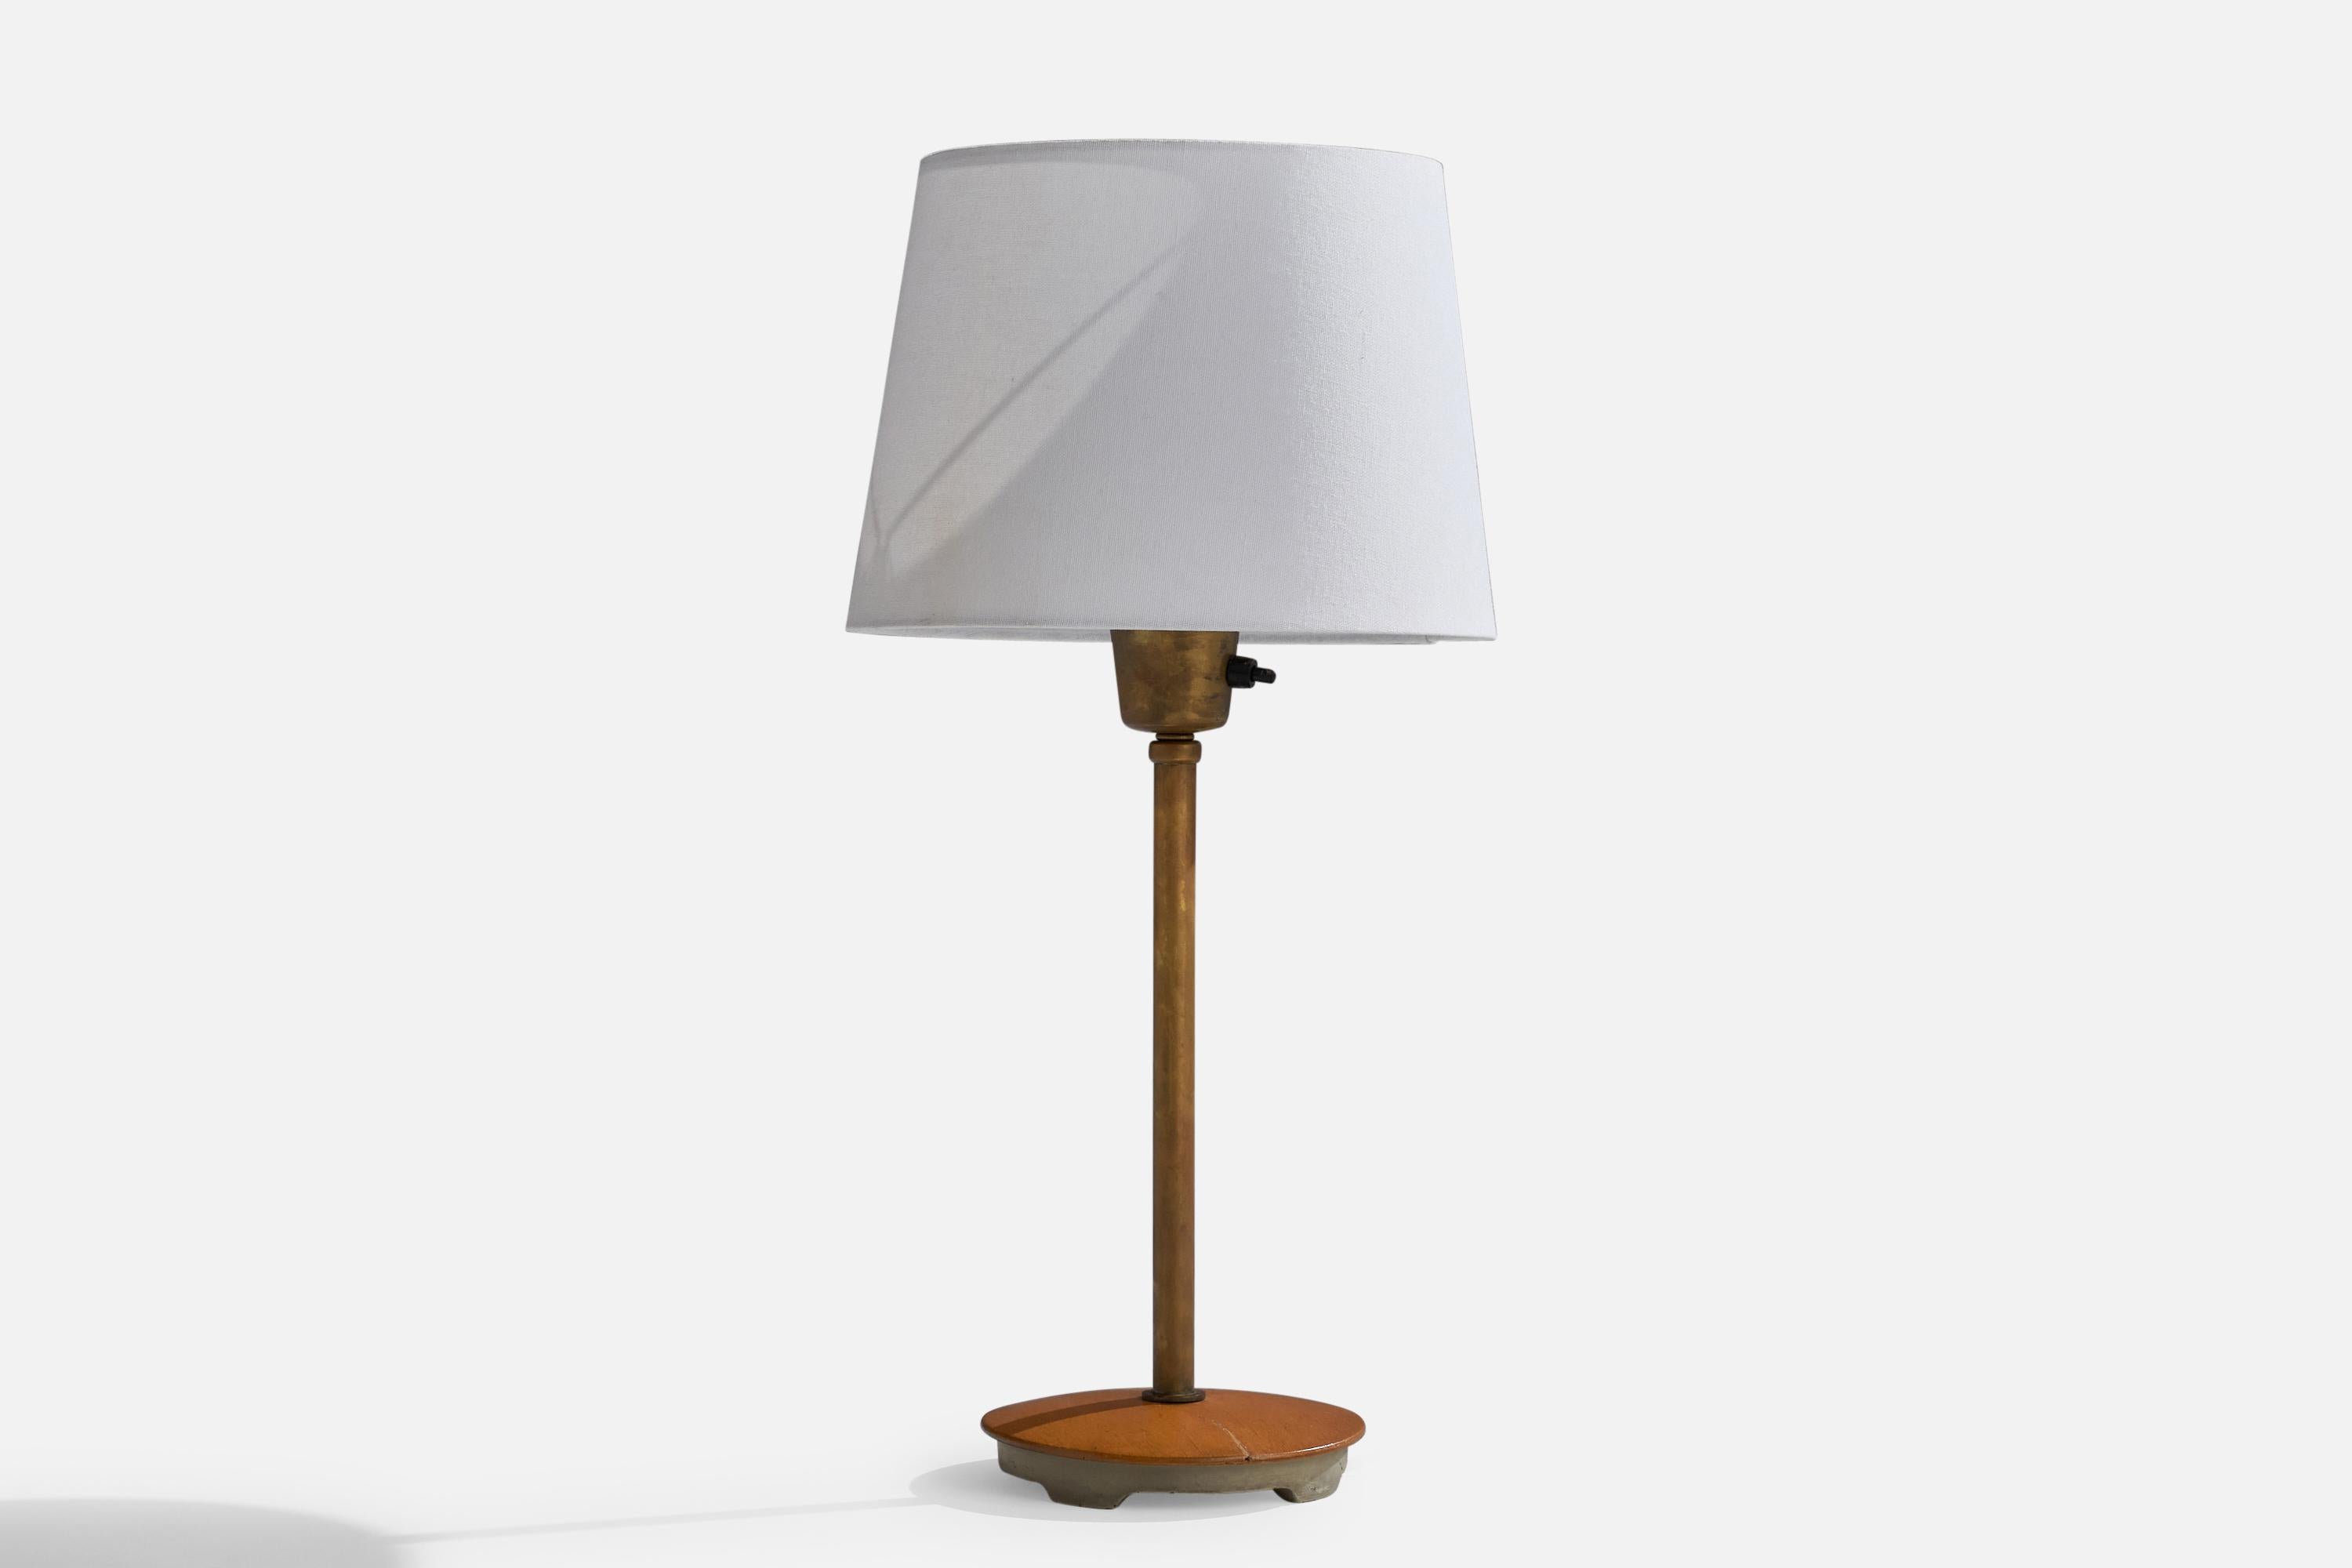 An adjustable brass, oak and iron table lamp designed by Bertil Brisborg and produced by Nordiska Kompaniet, Sweden, 1940s.

Dimensions of Lamp (inches): 15.25” H x 6” Diameter
Dimensions of Shade (inches): 8” Top Diameter x 9.75” Bottom Diameter x